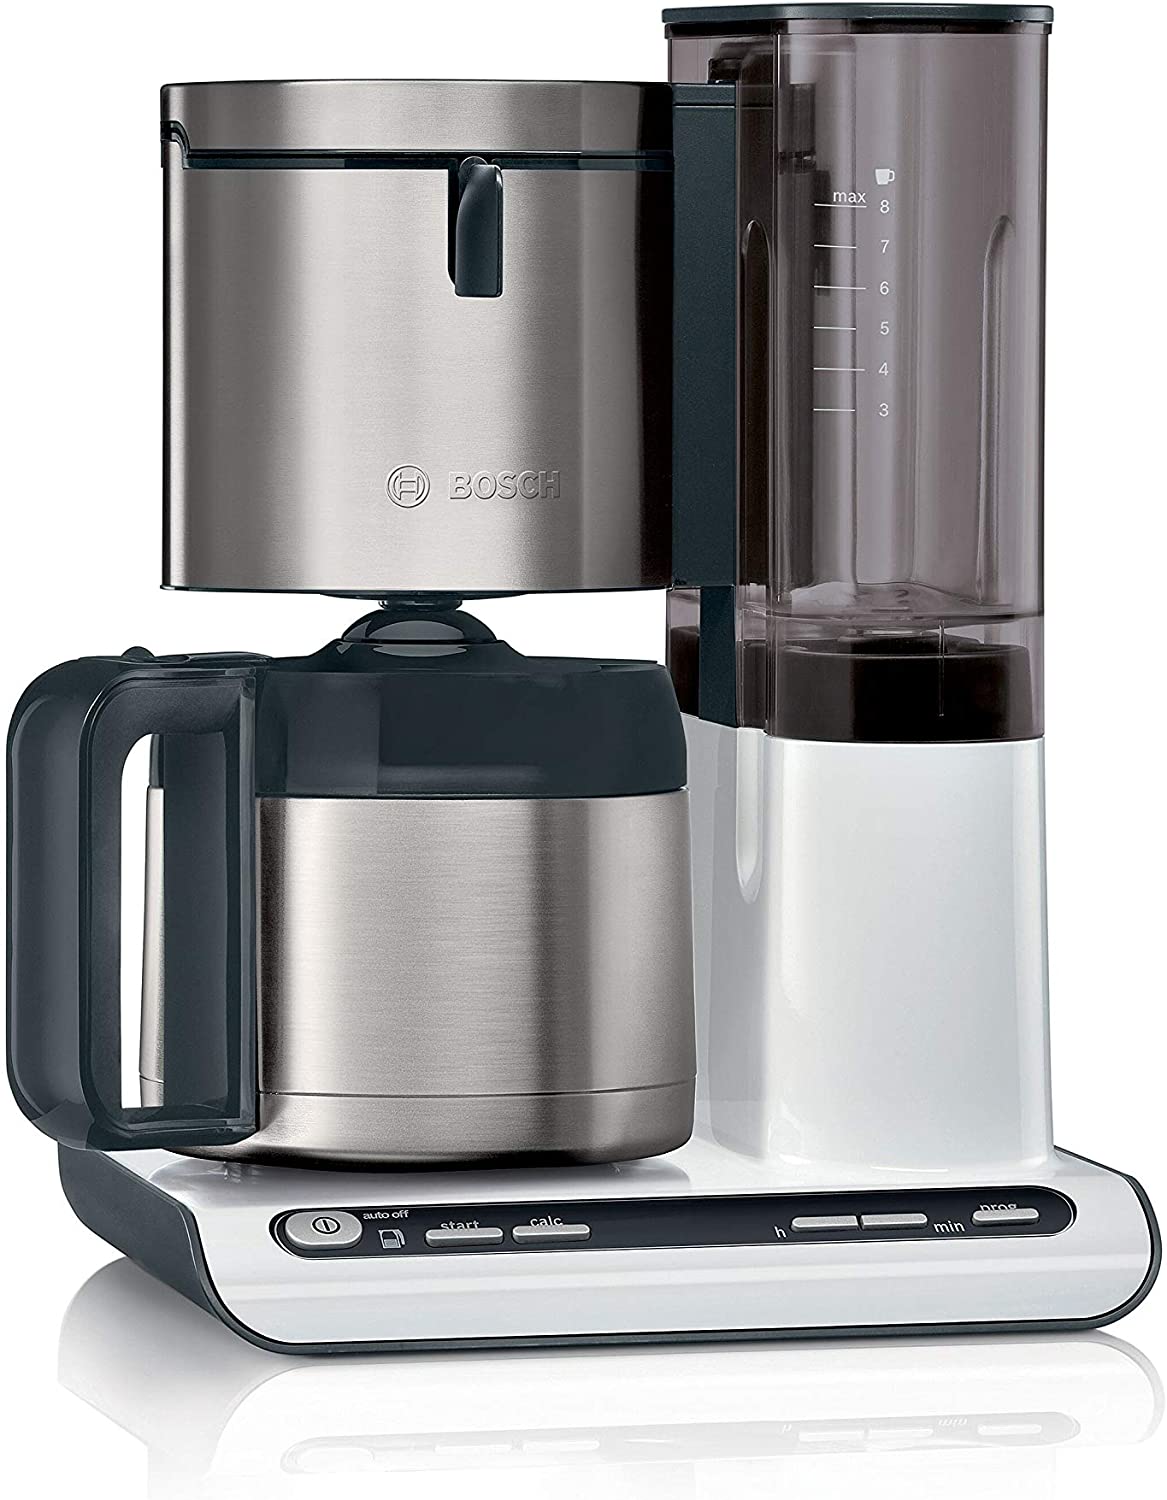 Bosch Hausgerate Bosch Styline TKA8A681 Filter Coffee Machine, Aroma Sensor, Stainless Steel Thermal Jug 1.1 L, for 8-12 Cups, Automatic Shut-Off, Descaling System, Drip Stop, Removable Water Tank (1 L), 1100 W, White